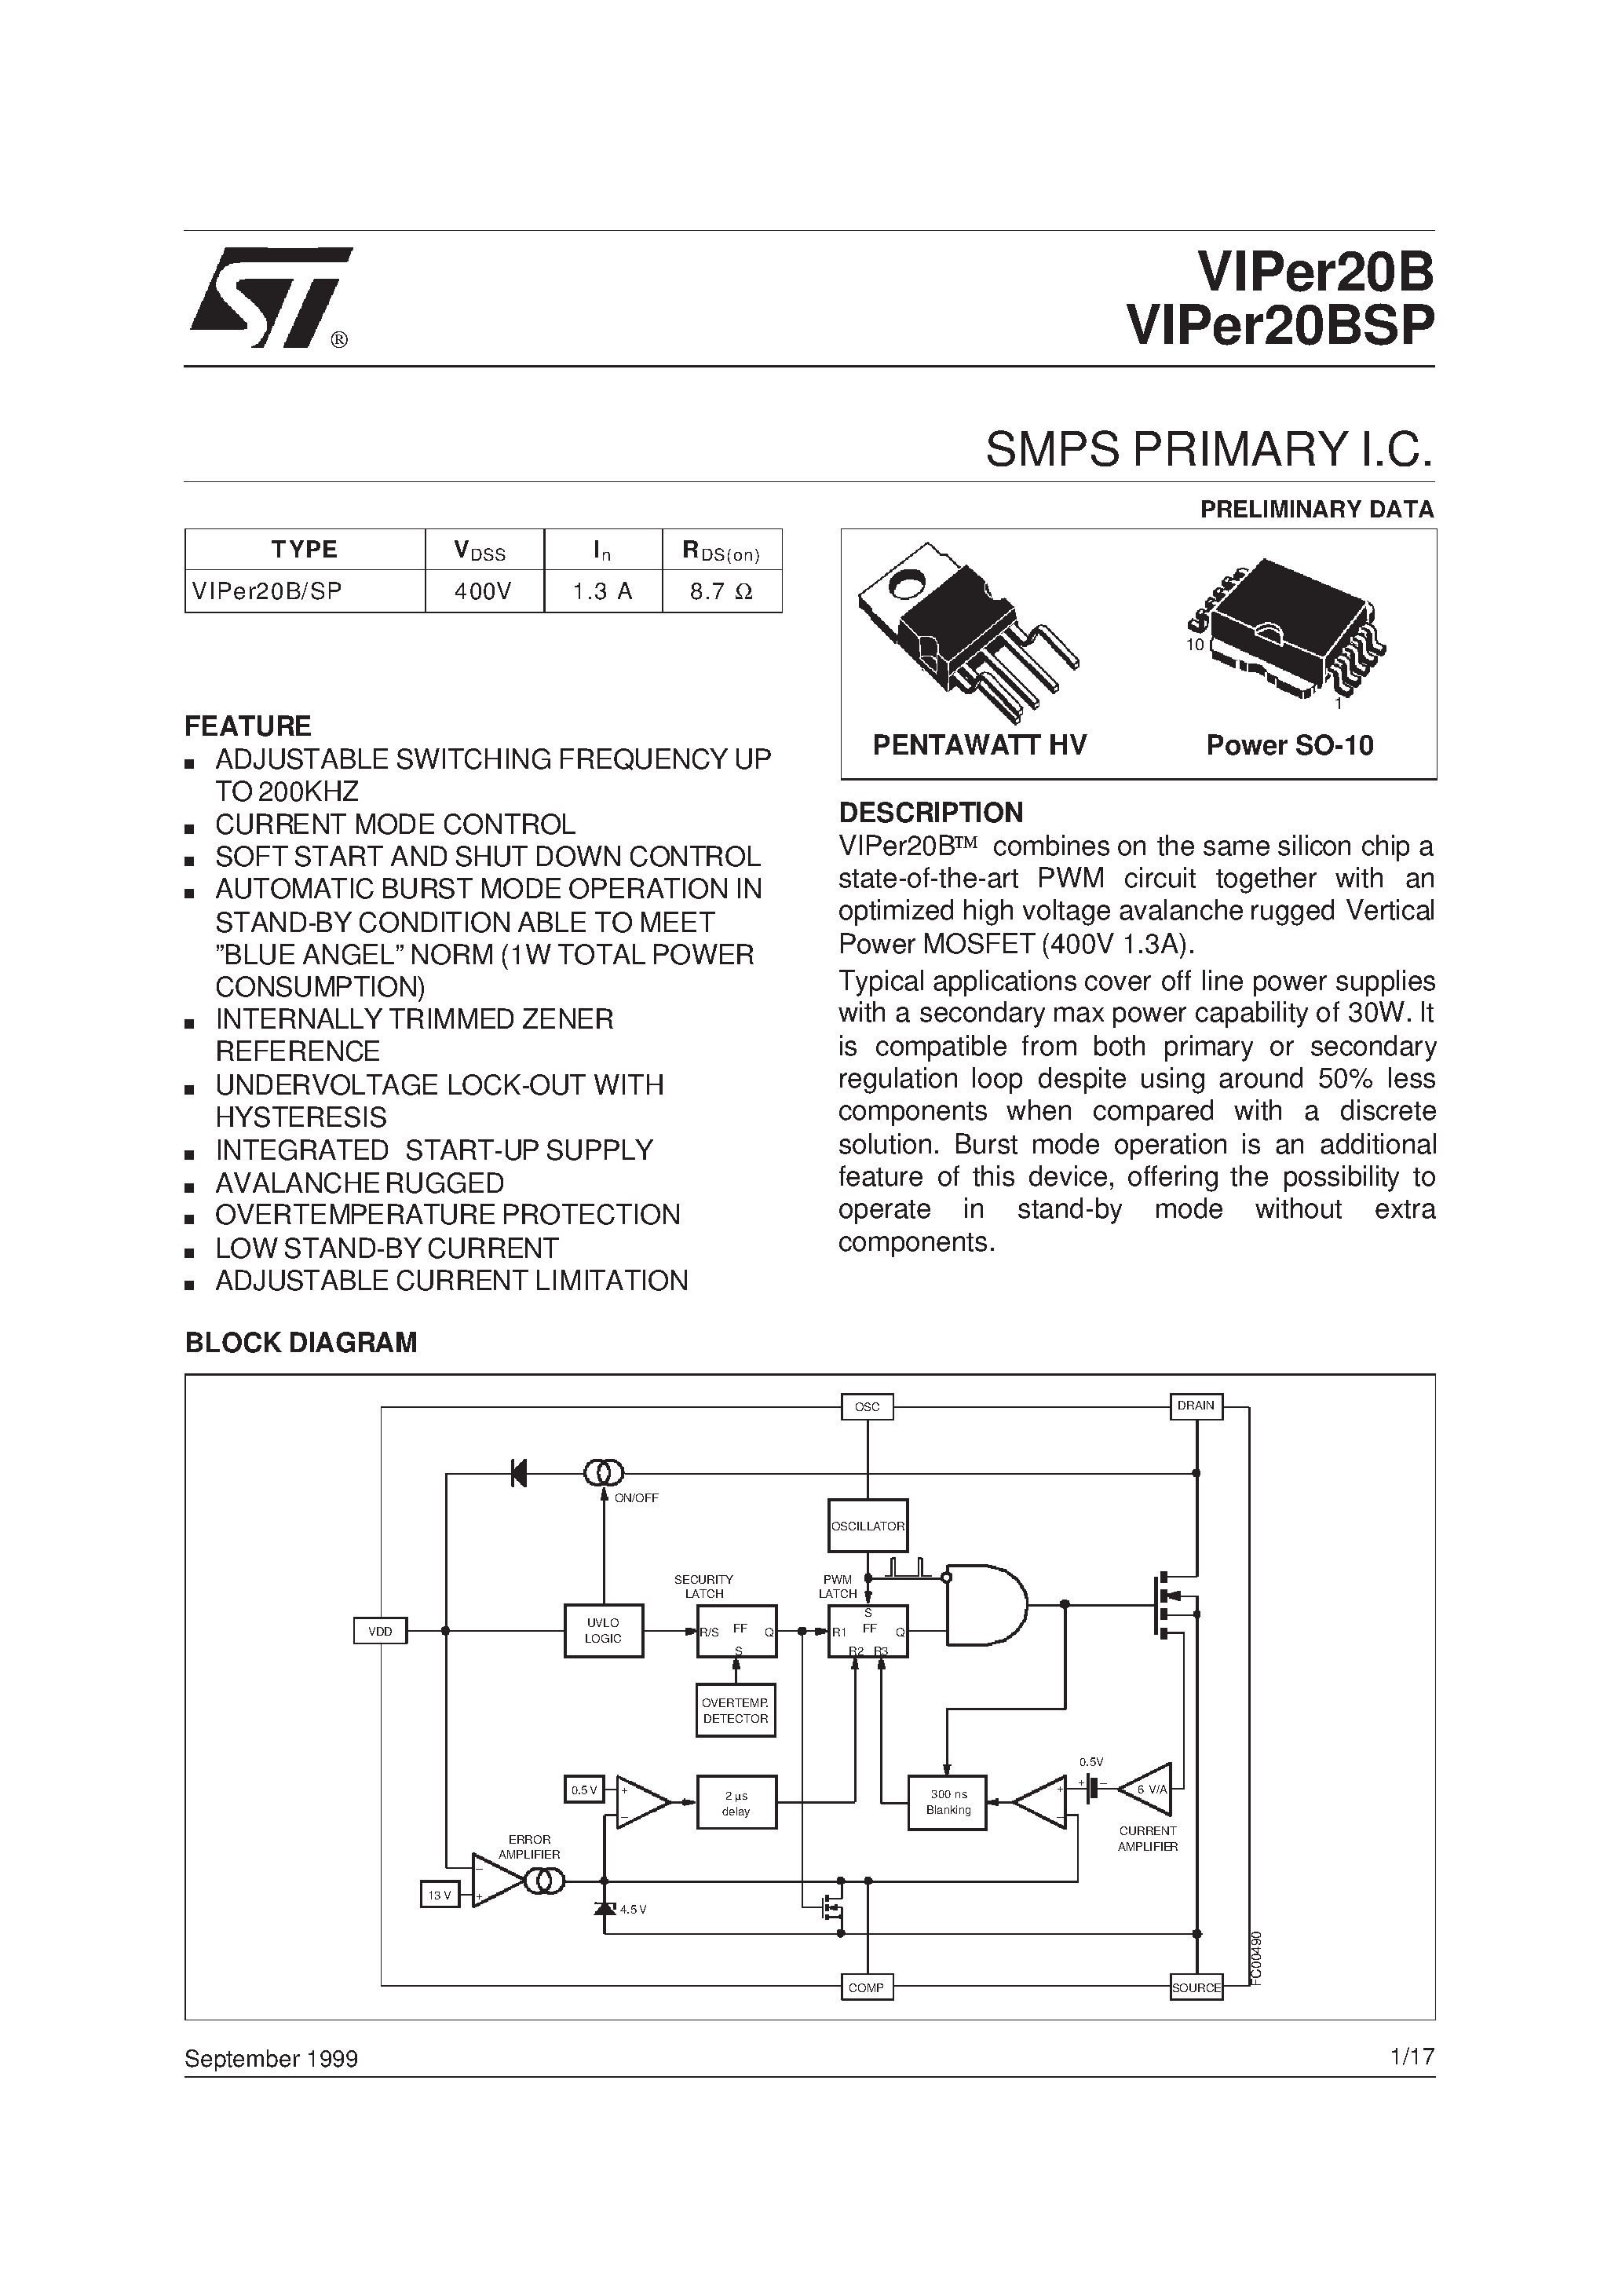 Datasheet VIPER20B - SMPS PRIMARY I.C. page 1